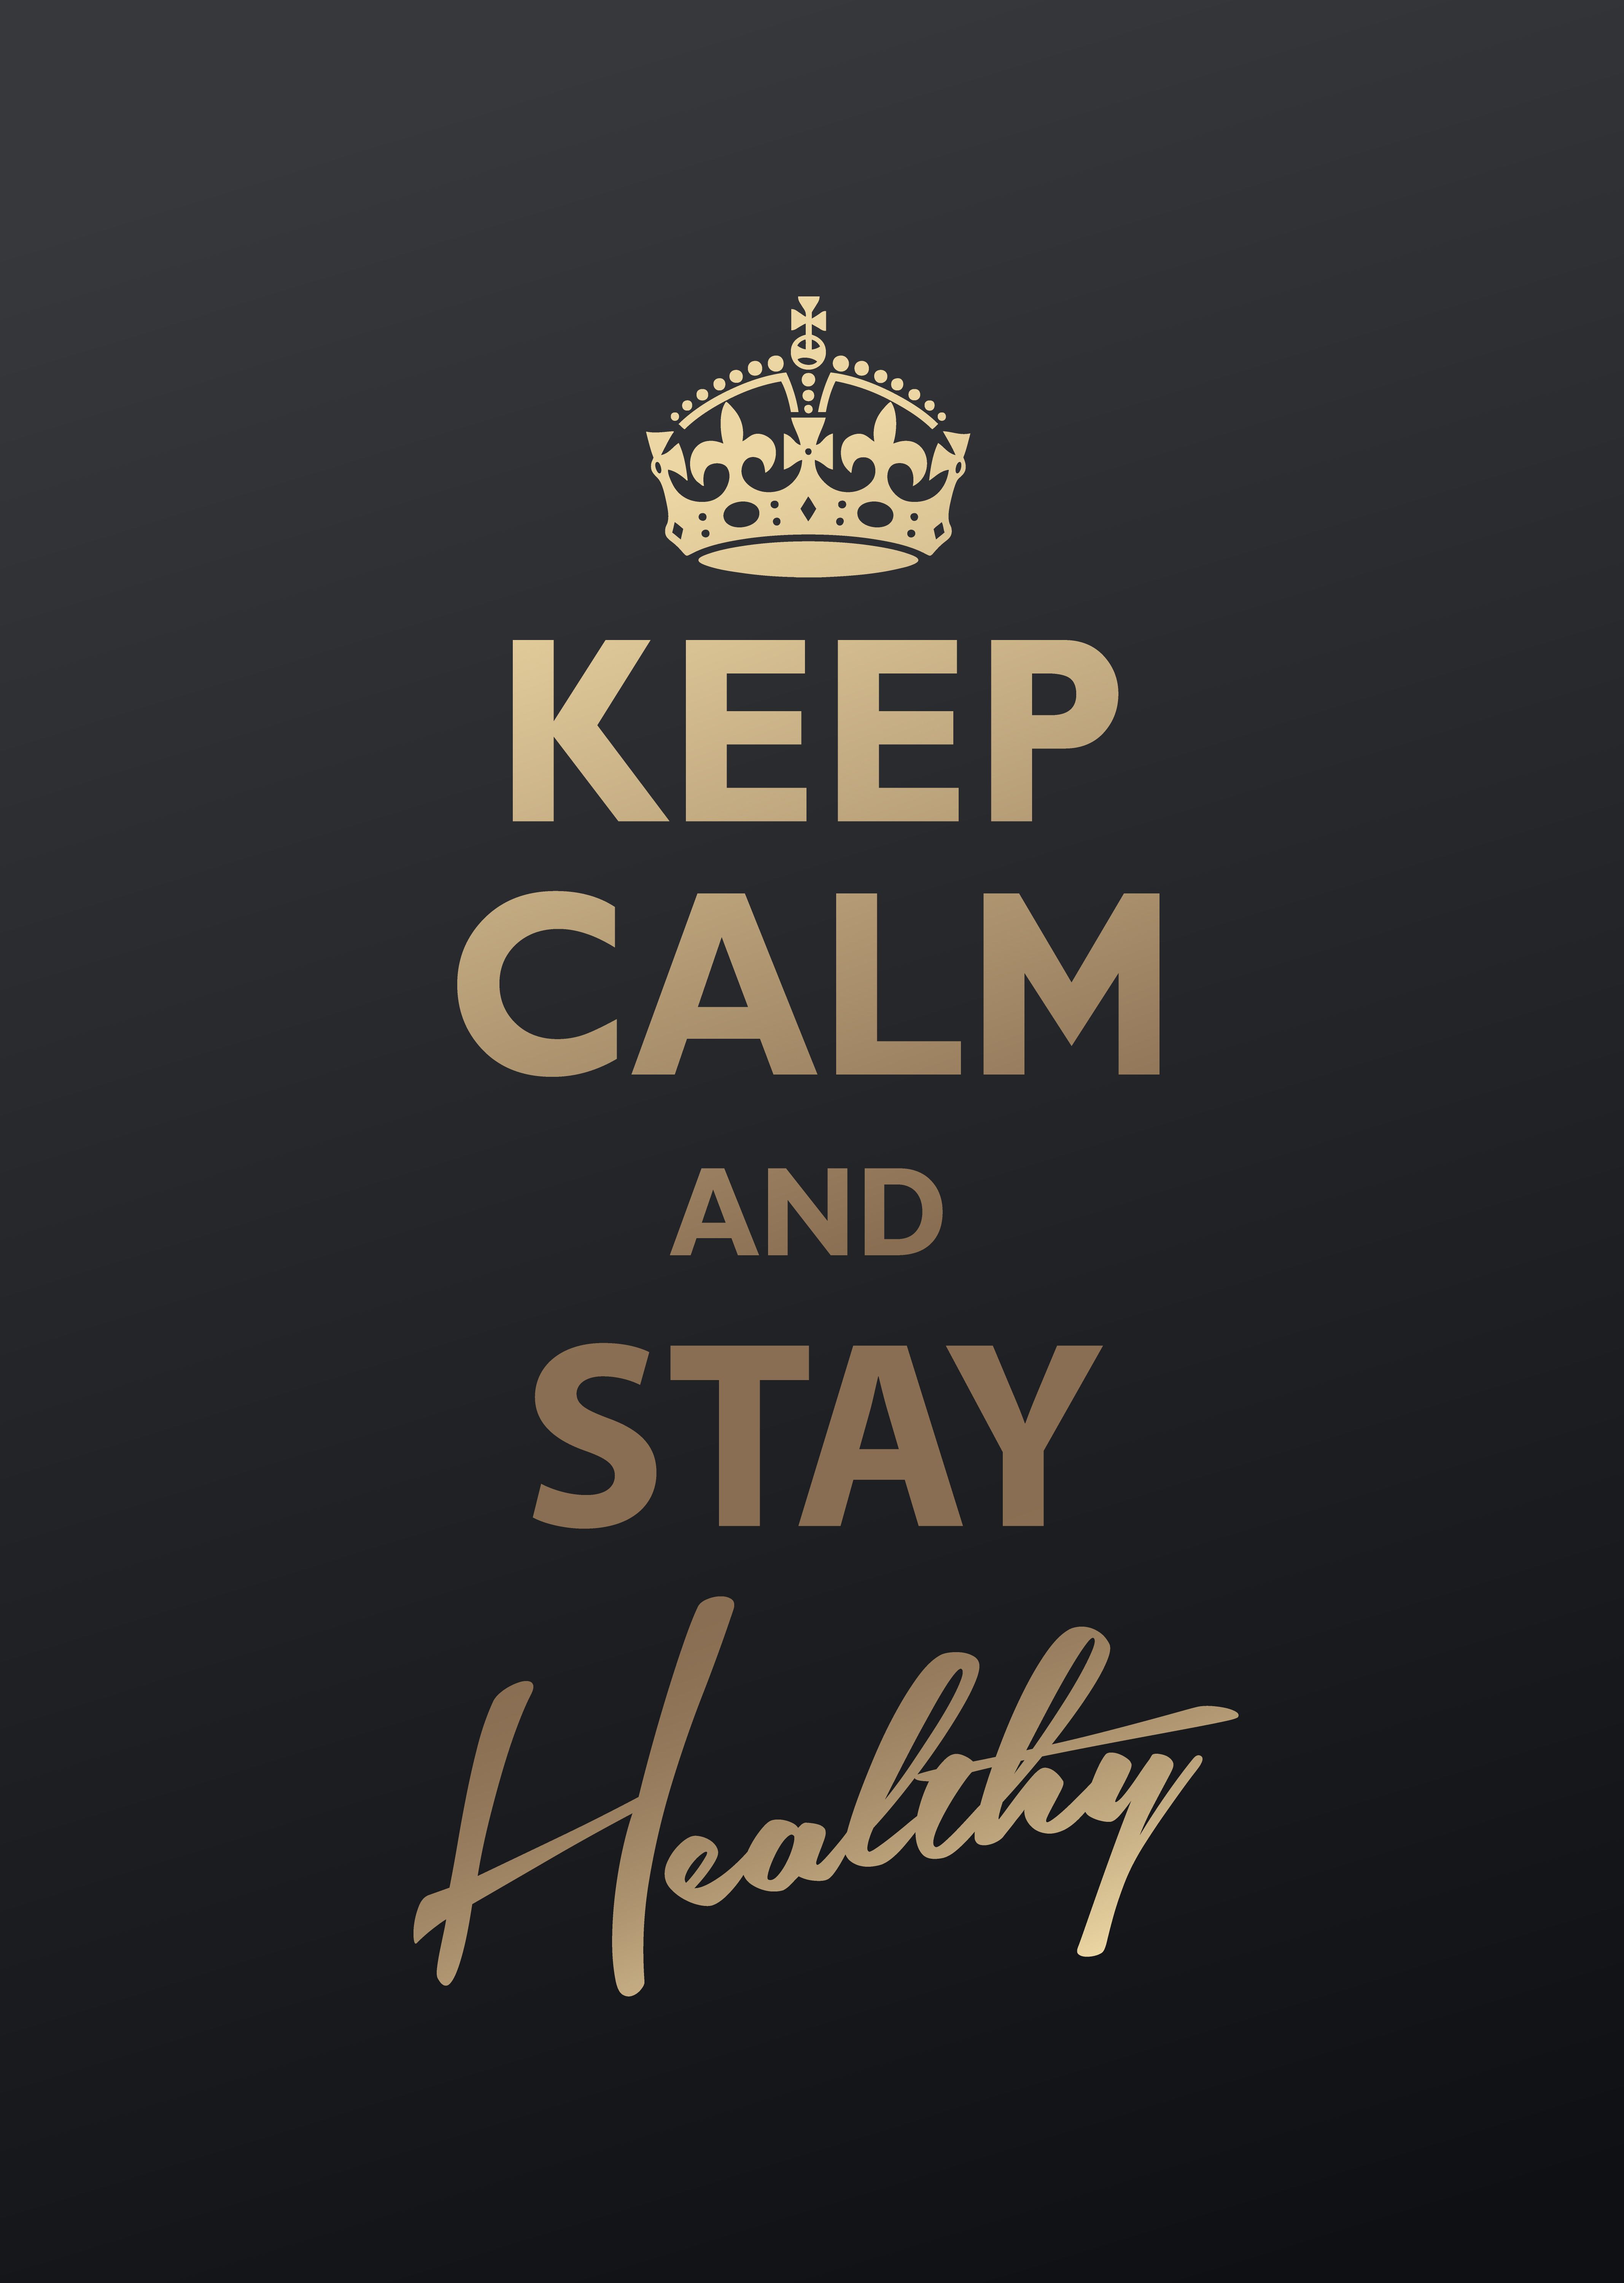 Keep Calm and Stay Healthy. Vector illustration. Vector illustration, Illustration, How to stay healthy